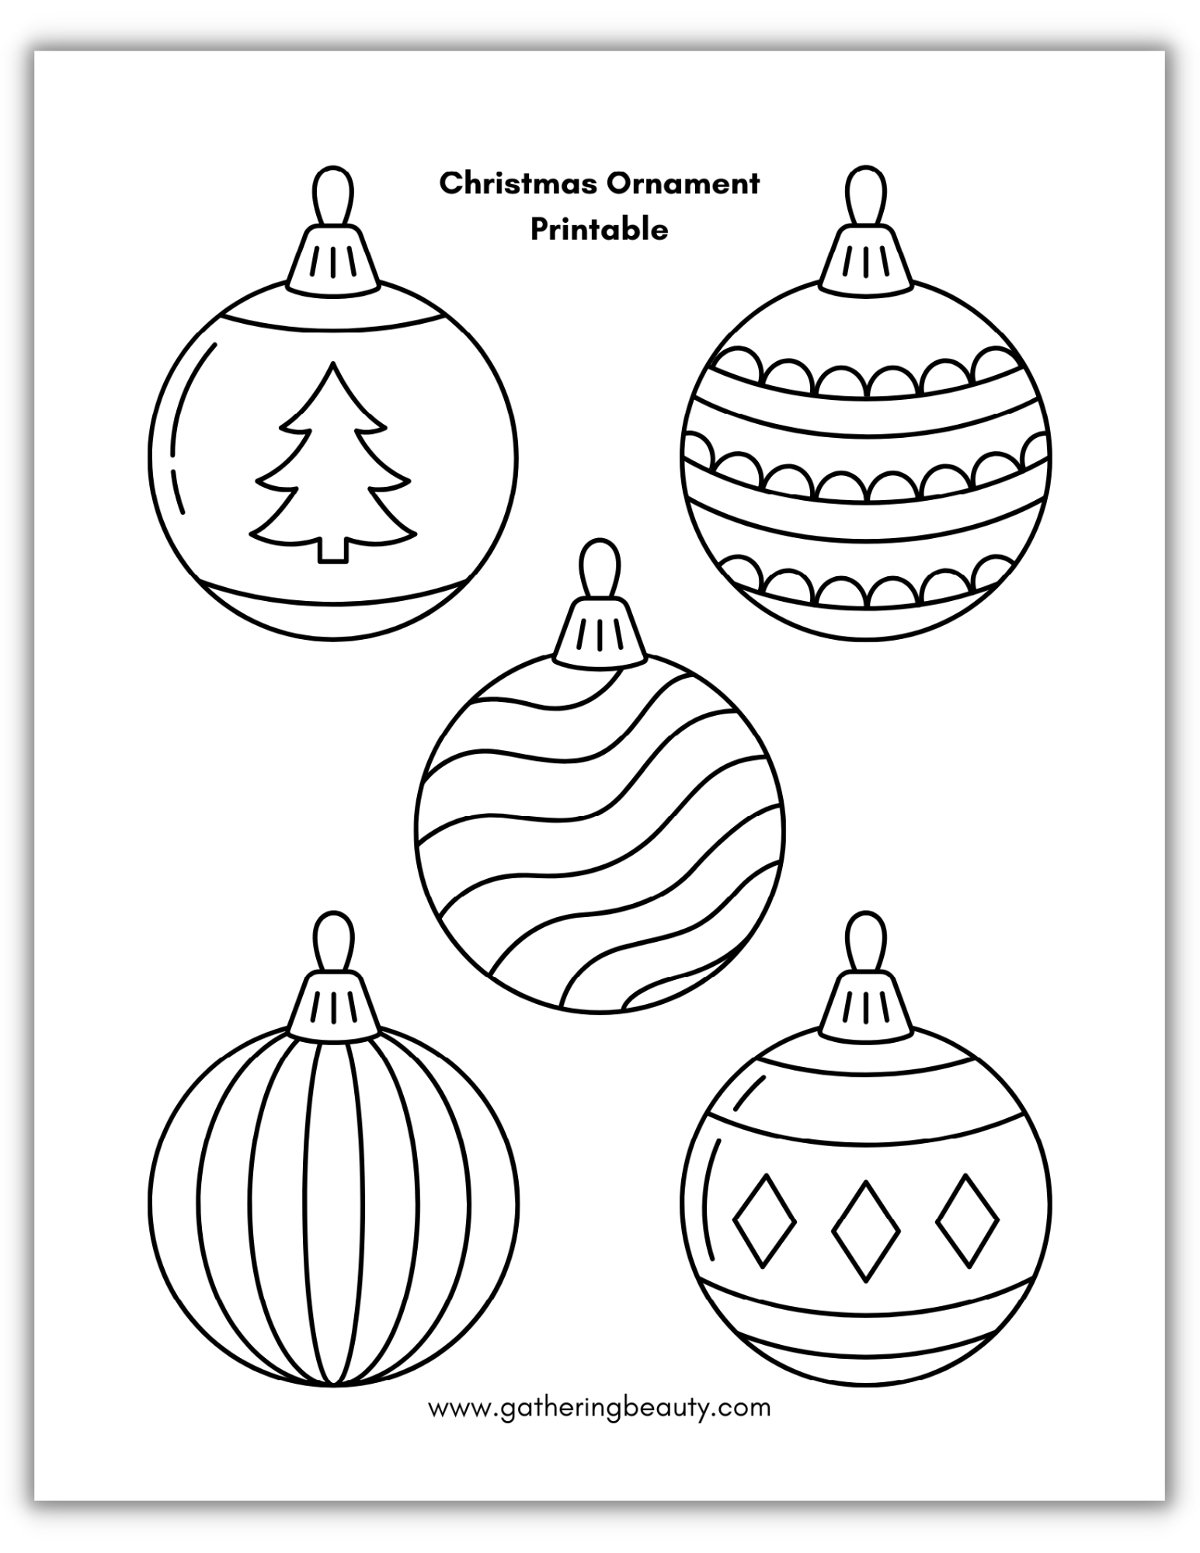 Cute and Friendly Penguin Coloring Pages to Print